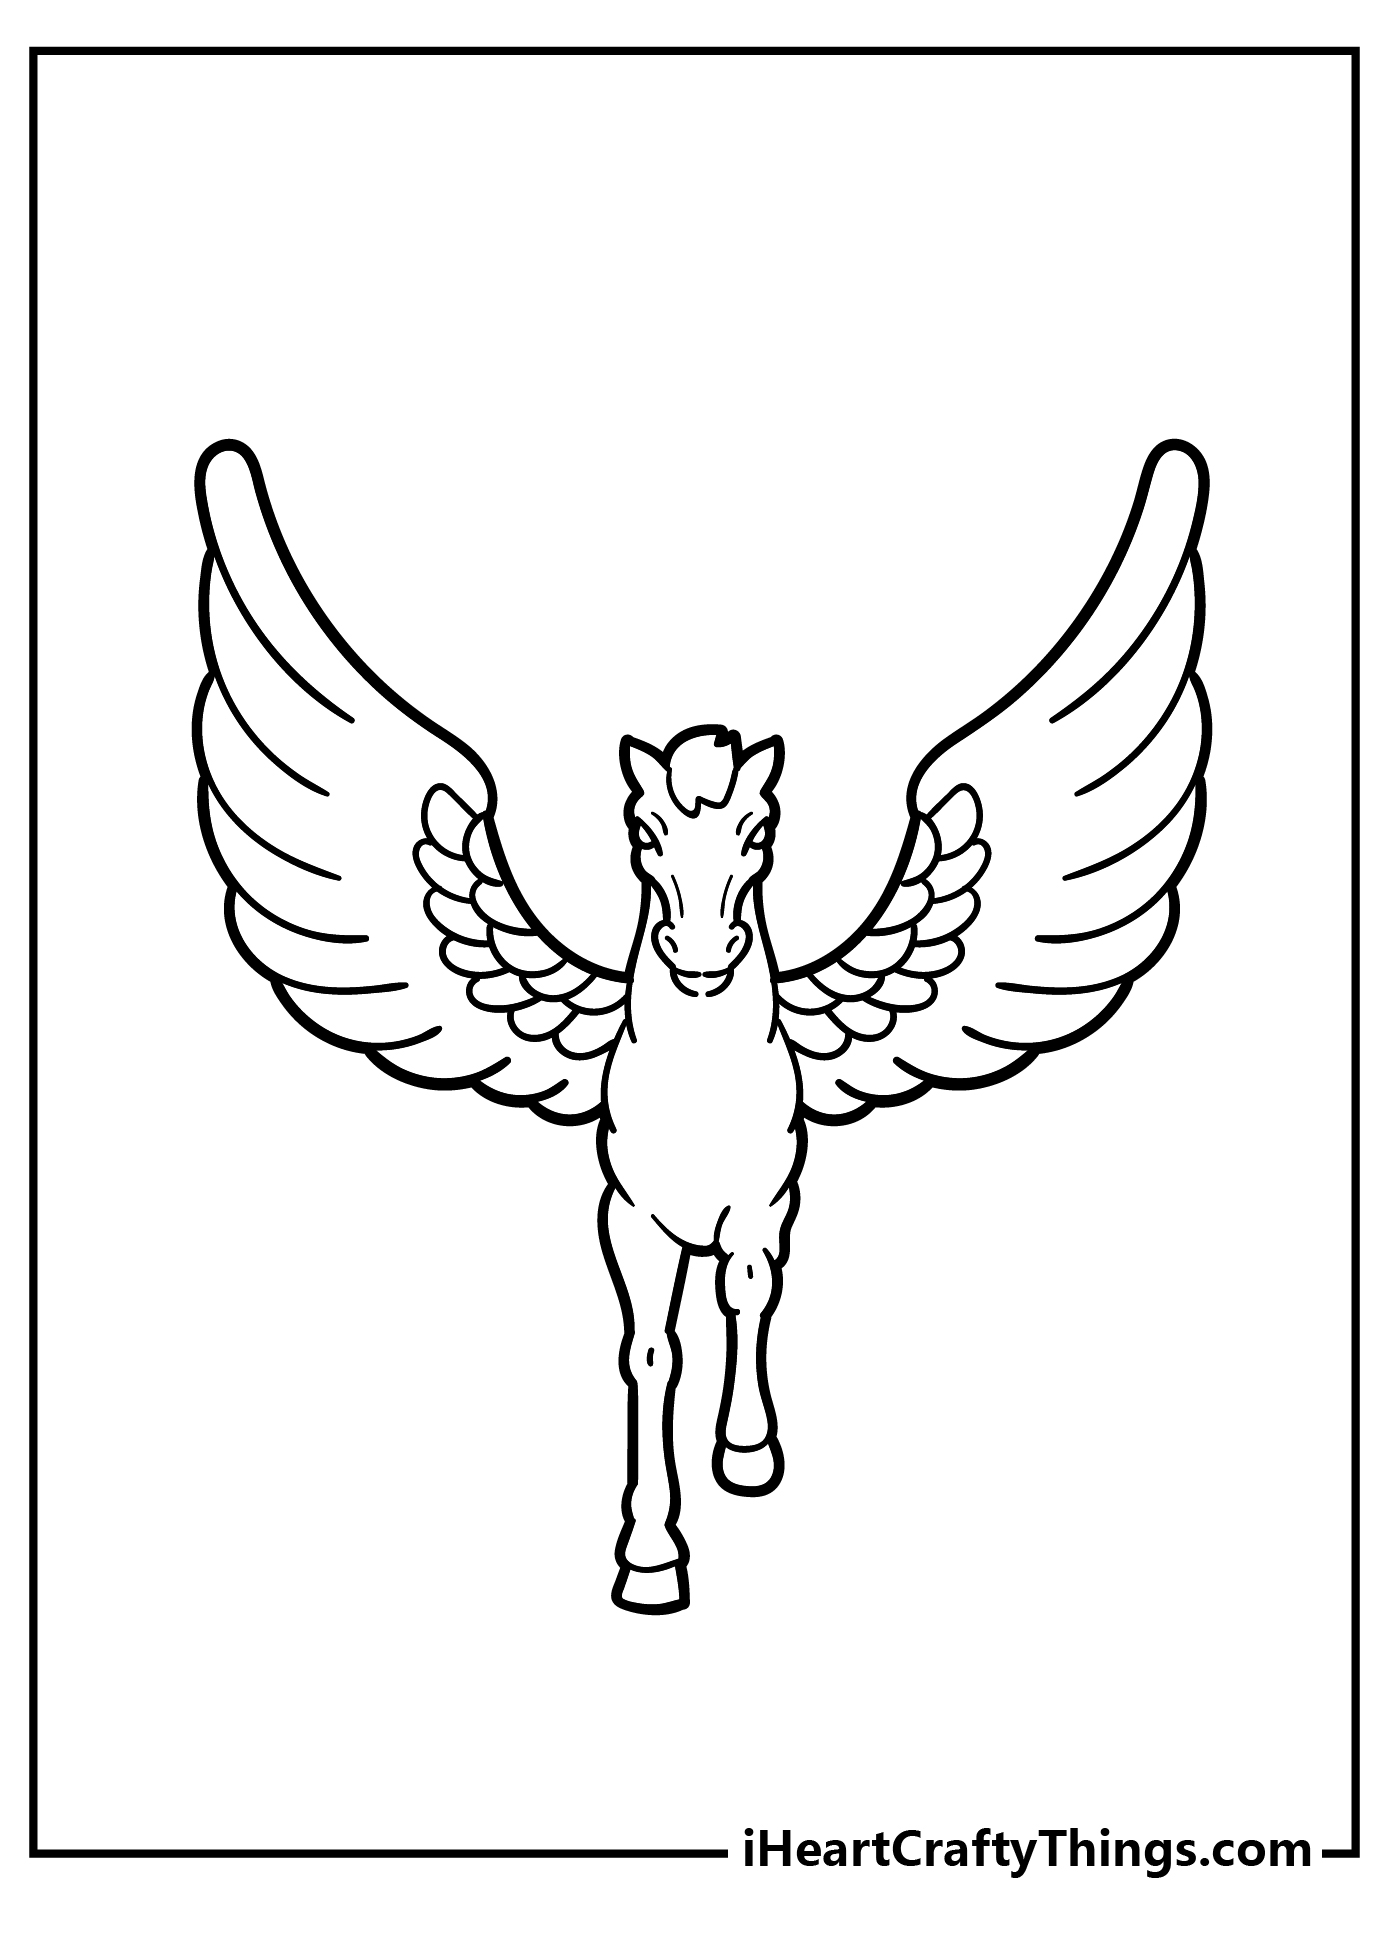 Pegasus Coloring Book for adults free download